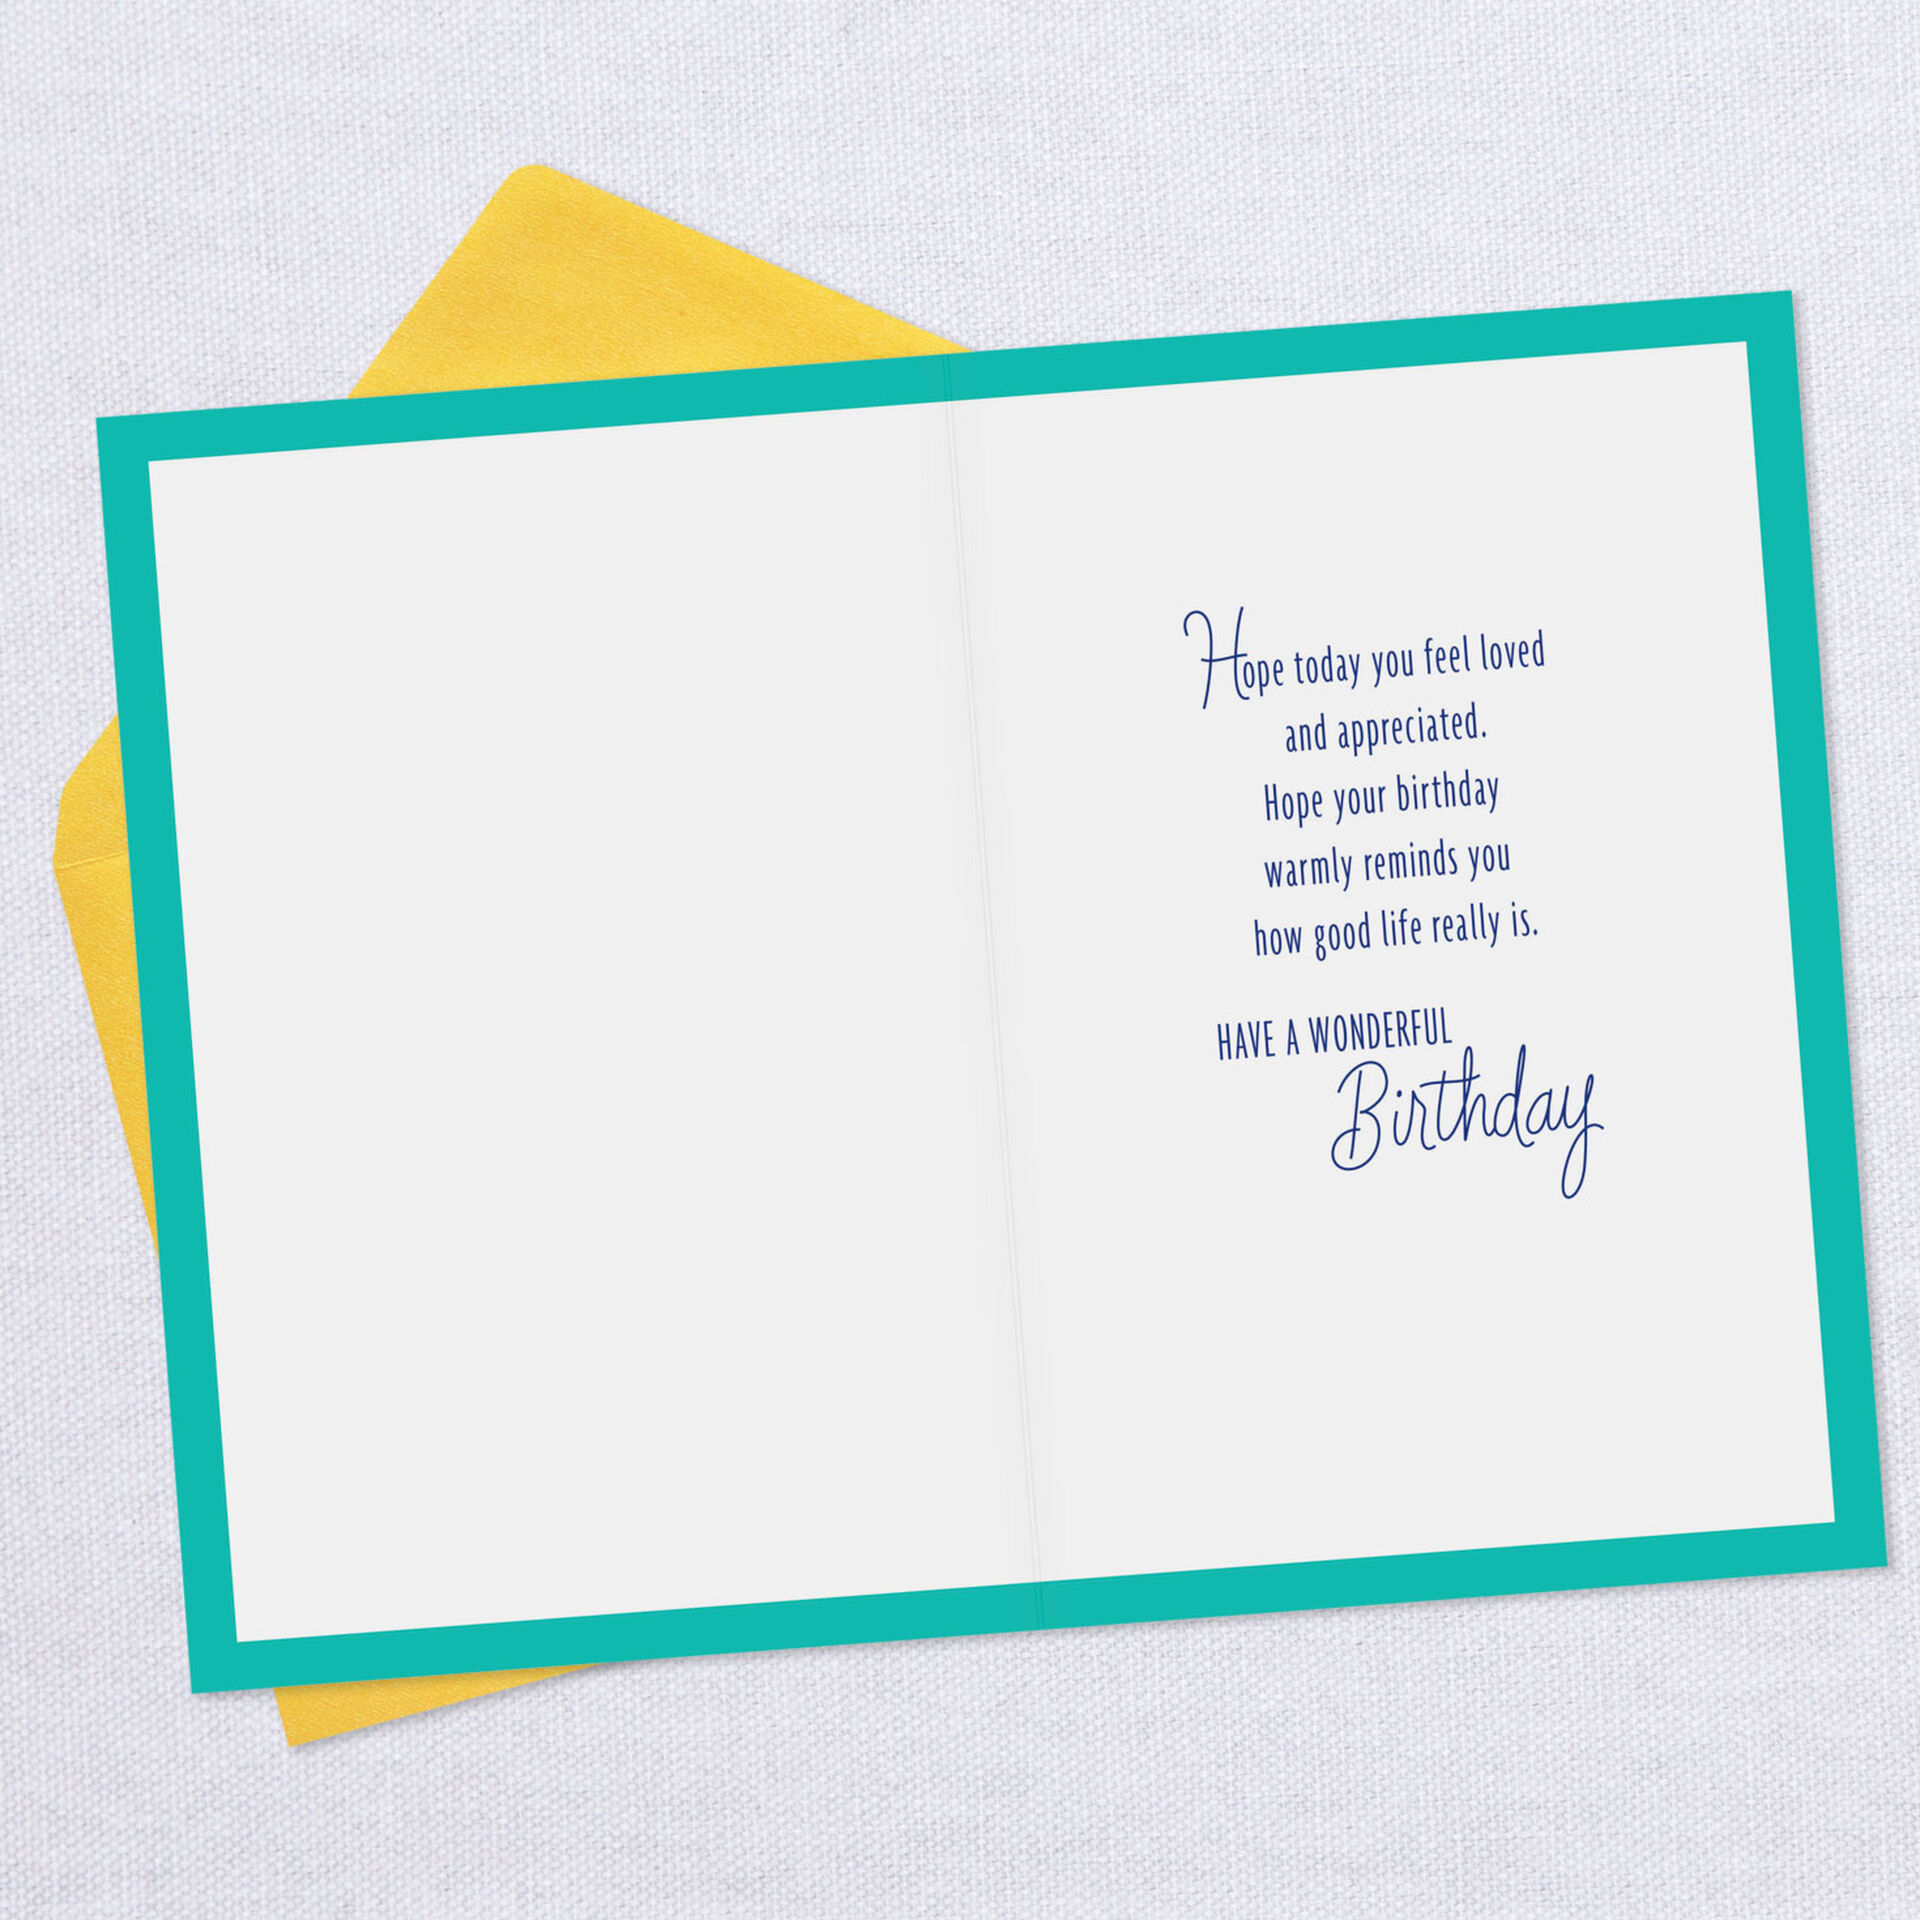 Cake-and-Candles-Blessings-Birthday-Card_200SUV1317_03